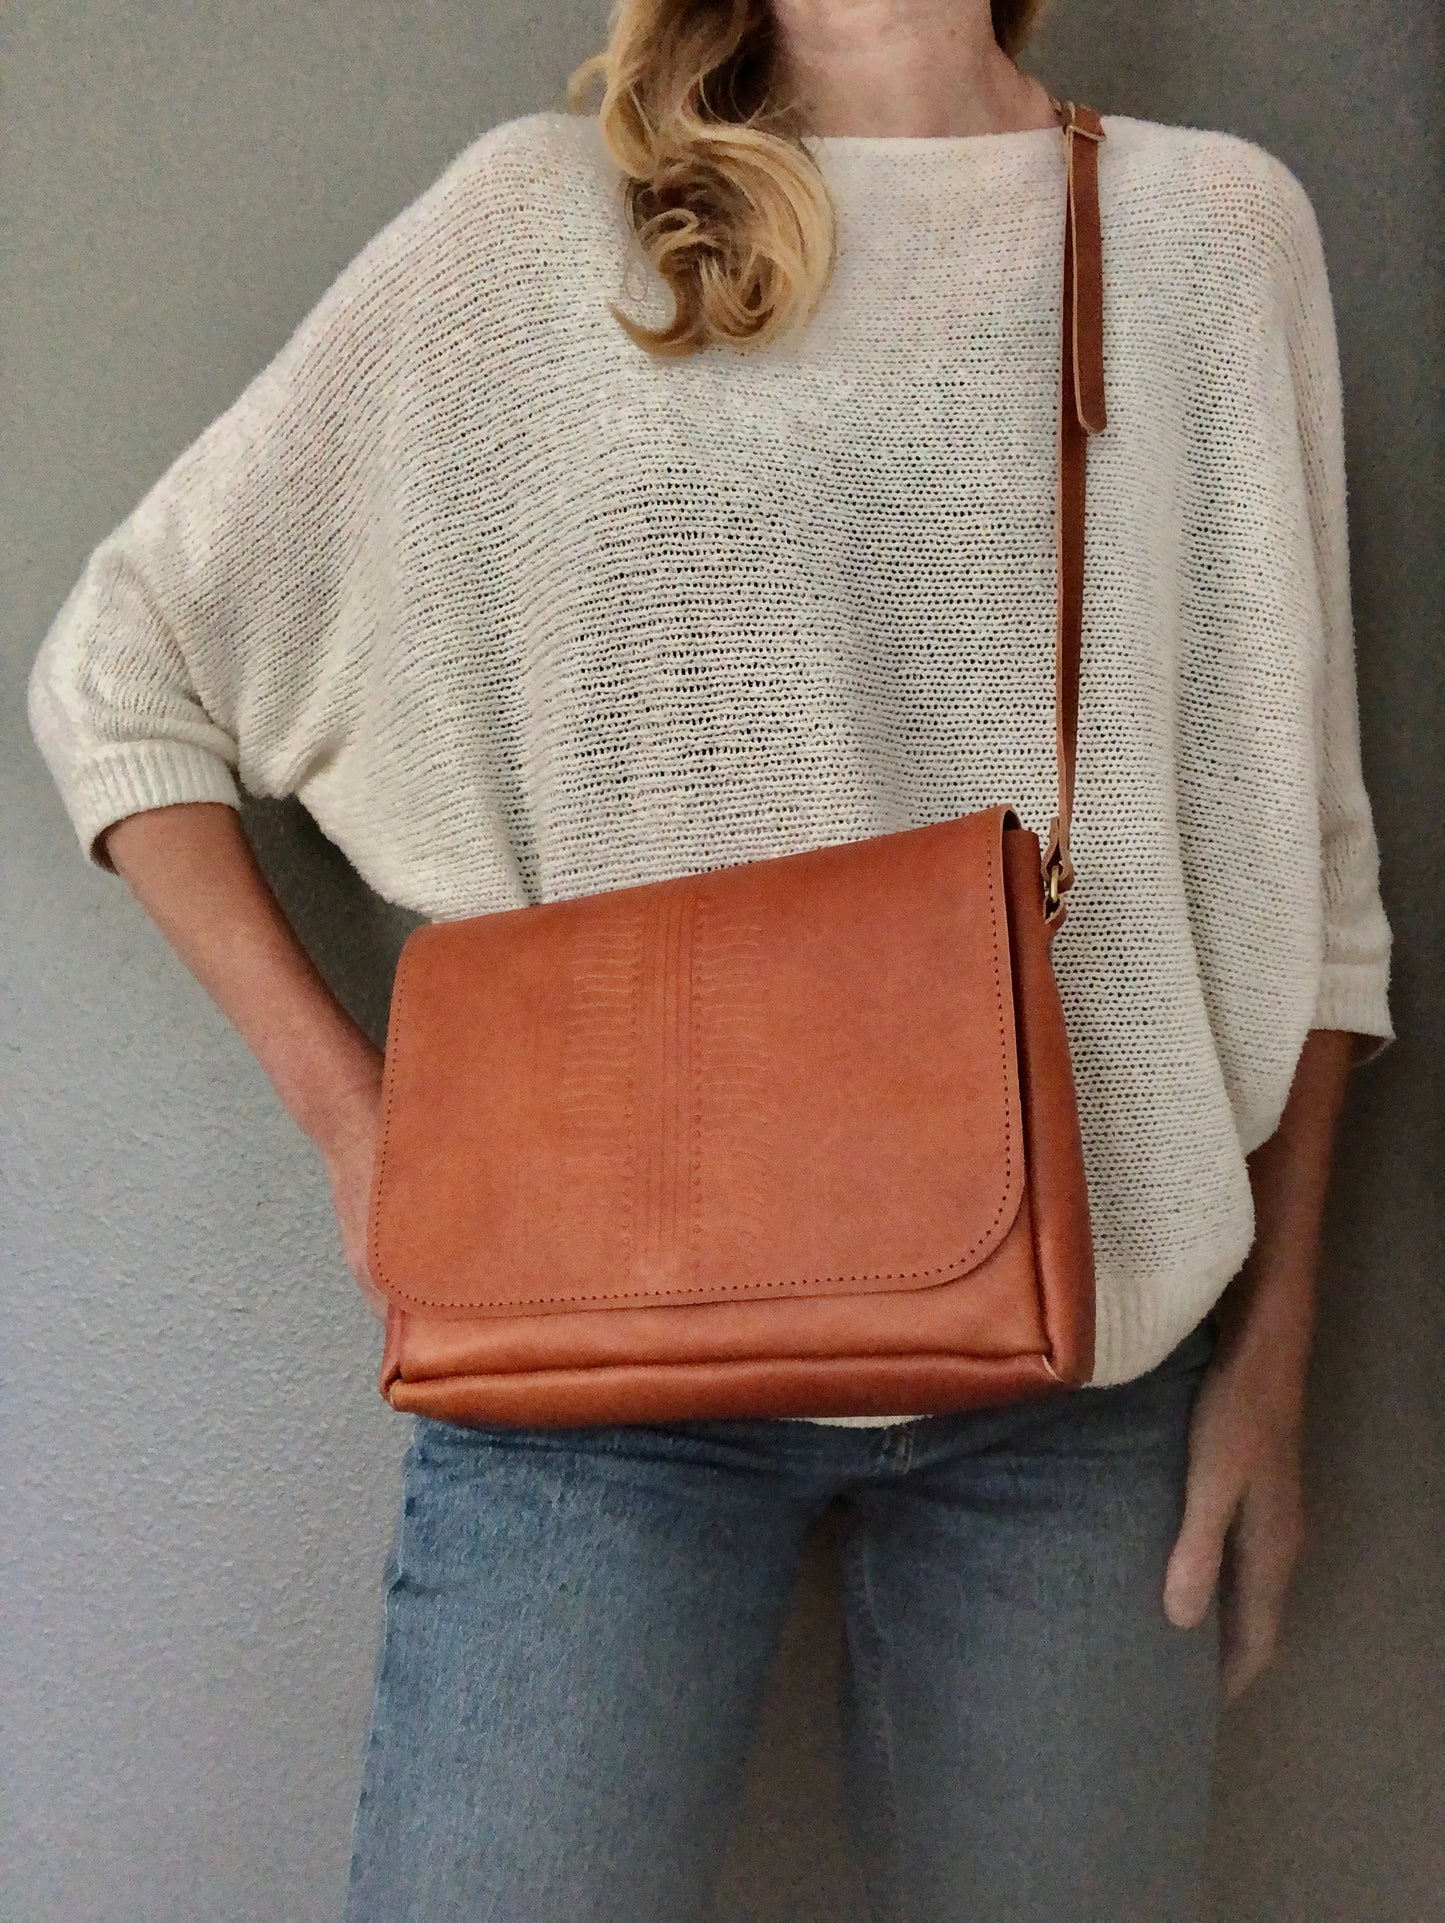 Woman poses to show buttery, tan leather purse. Purse has a subtle tooled design on the front flap.